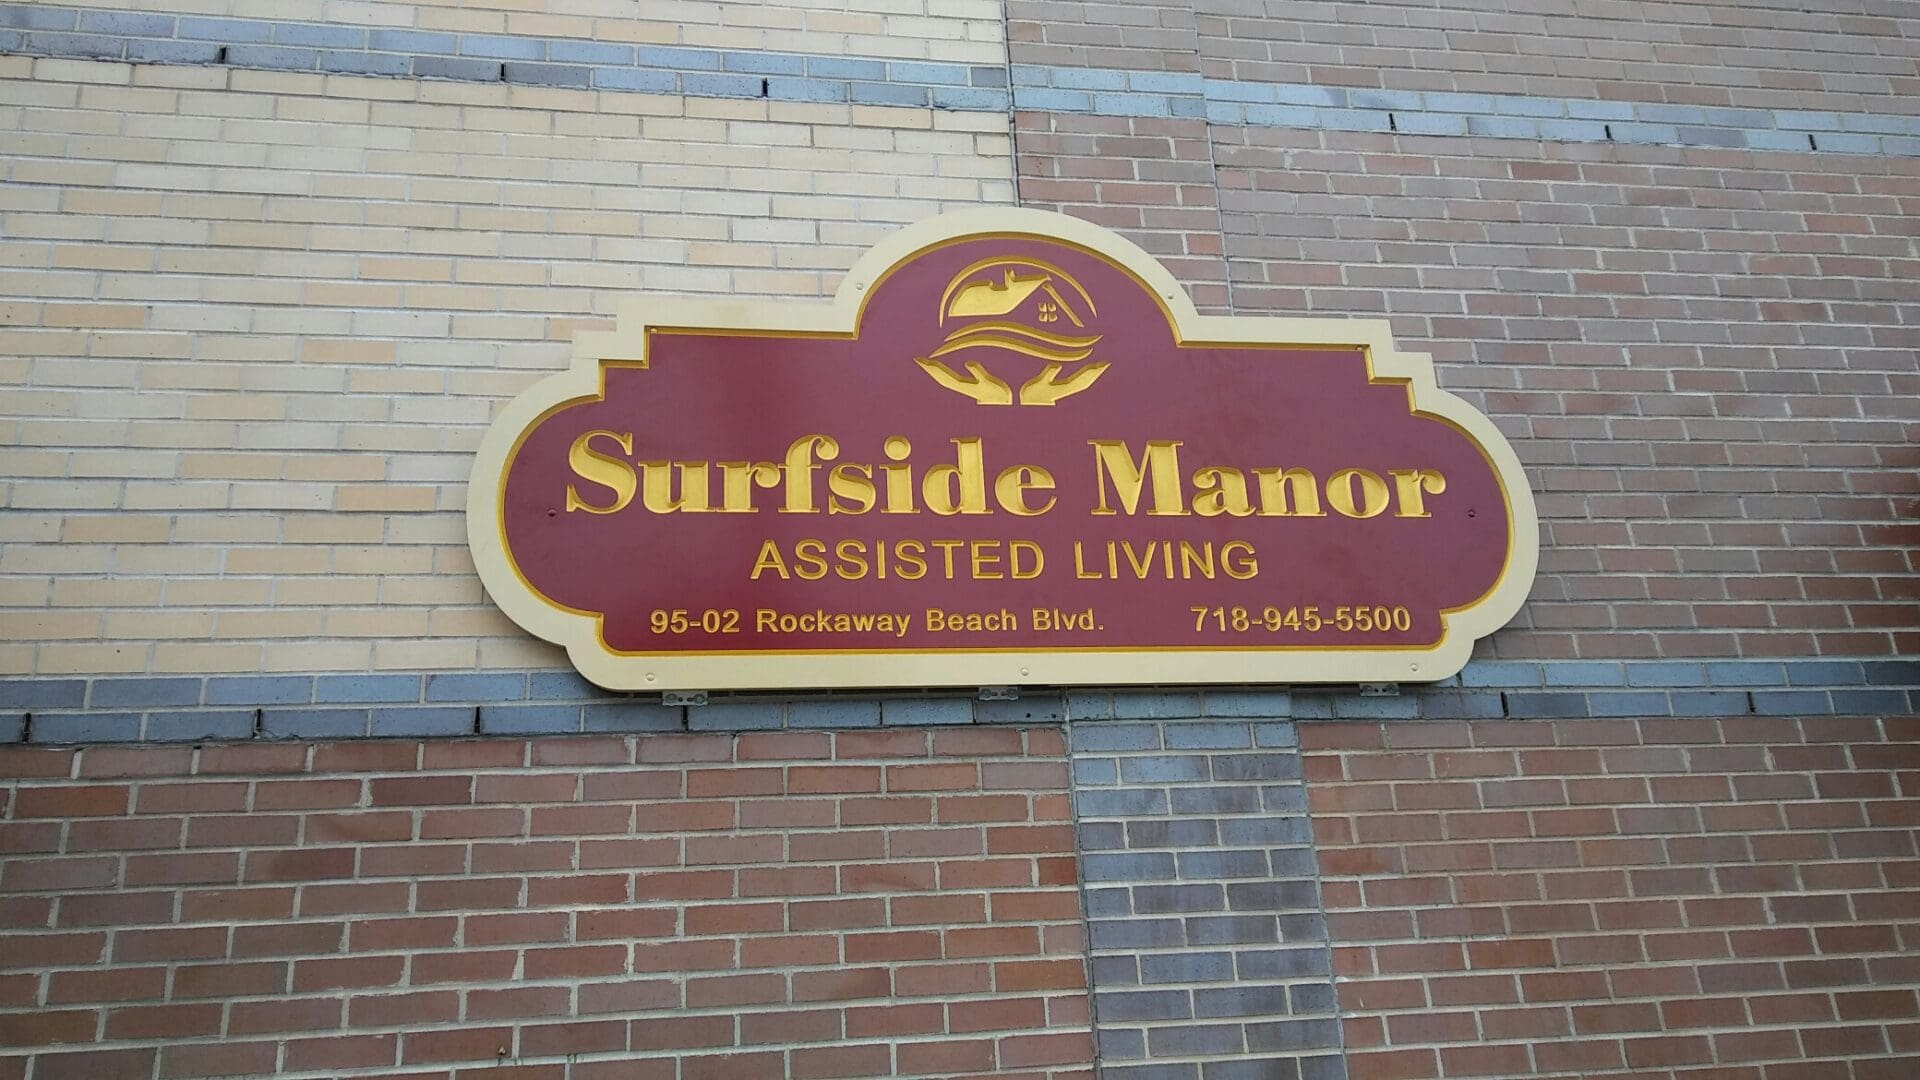 Sign for Surfside Manor Assisted Living with ADP USA Solutions Gallery and phone number on a brick wall.